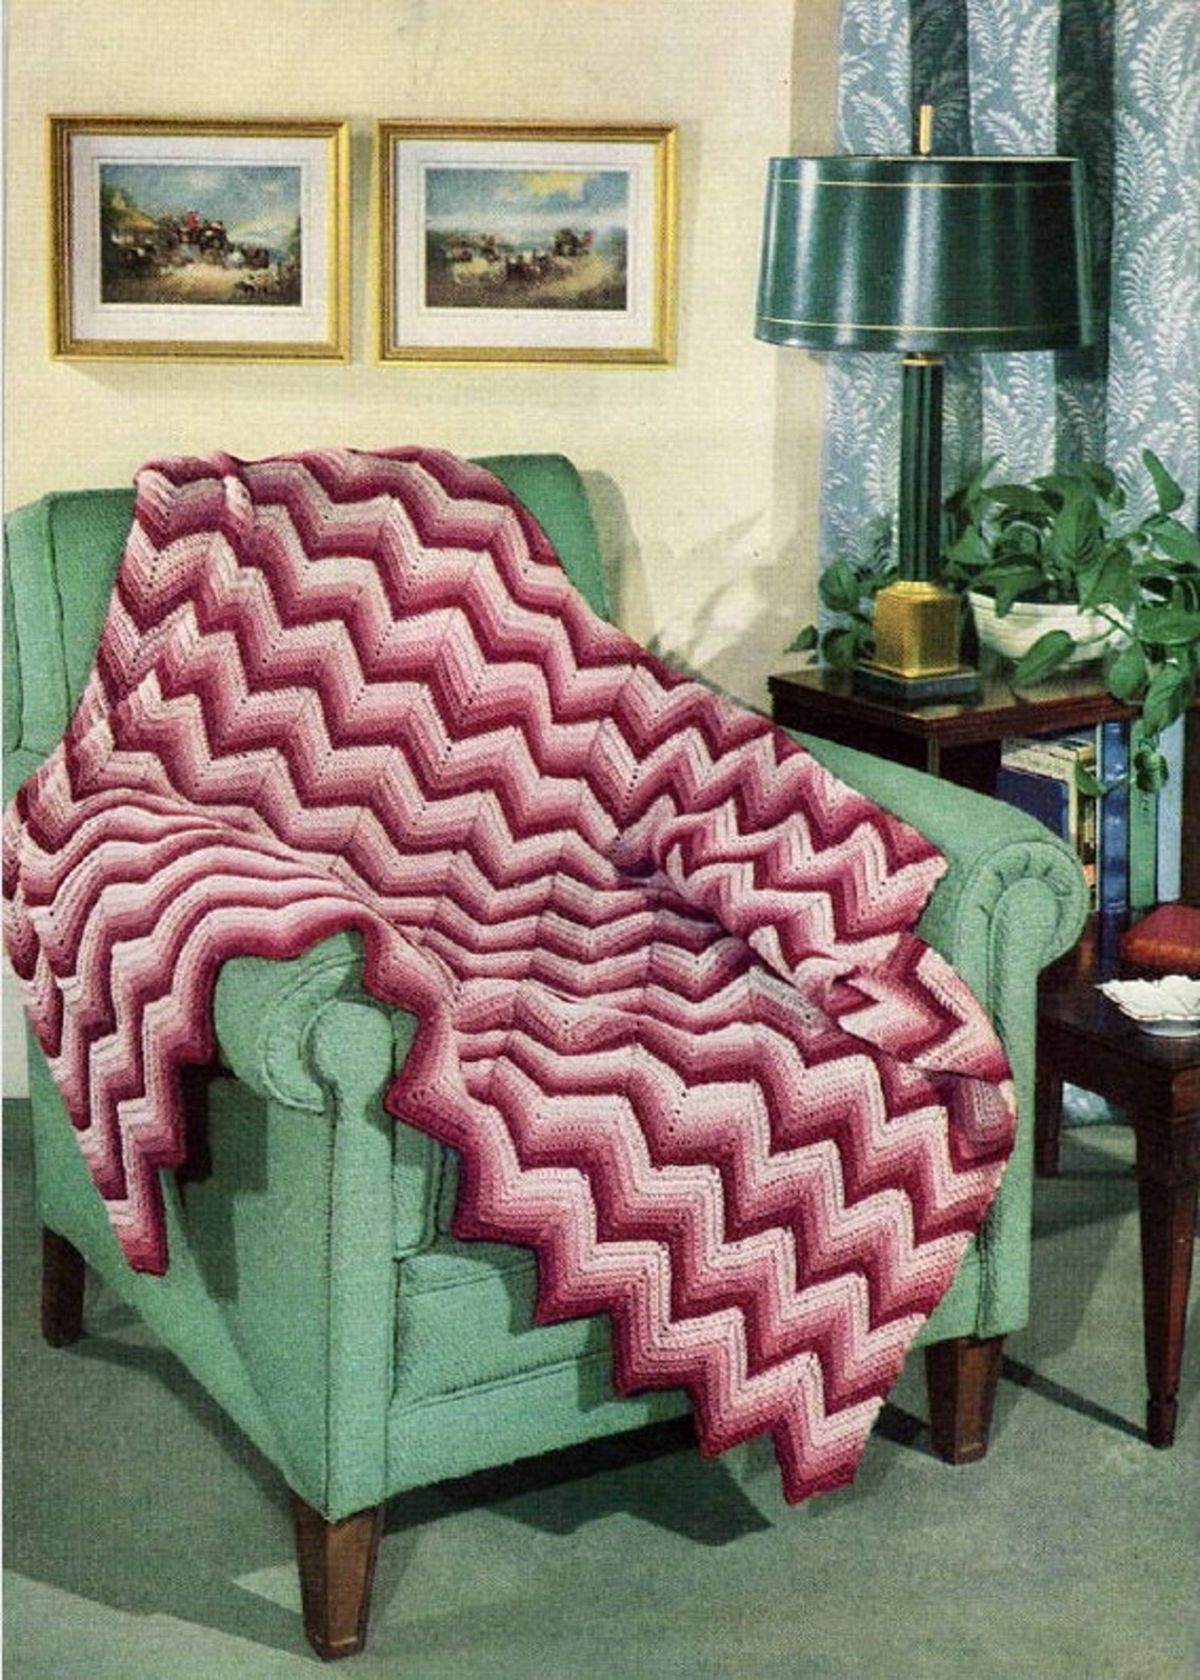 Large purple and pink crochet zig zag striped blanket with a zig zag trim on the bottom draped over a green chair.